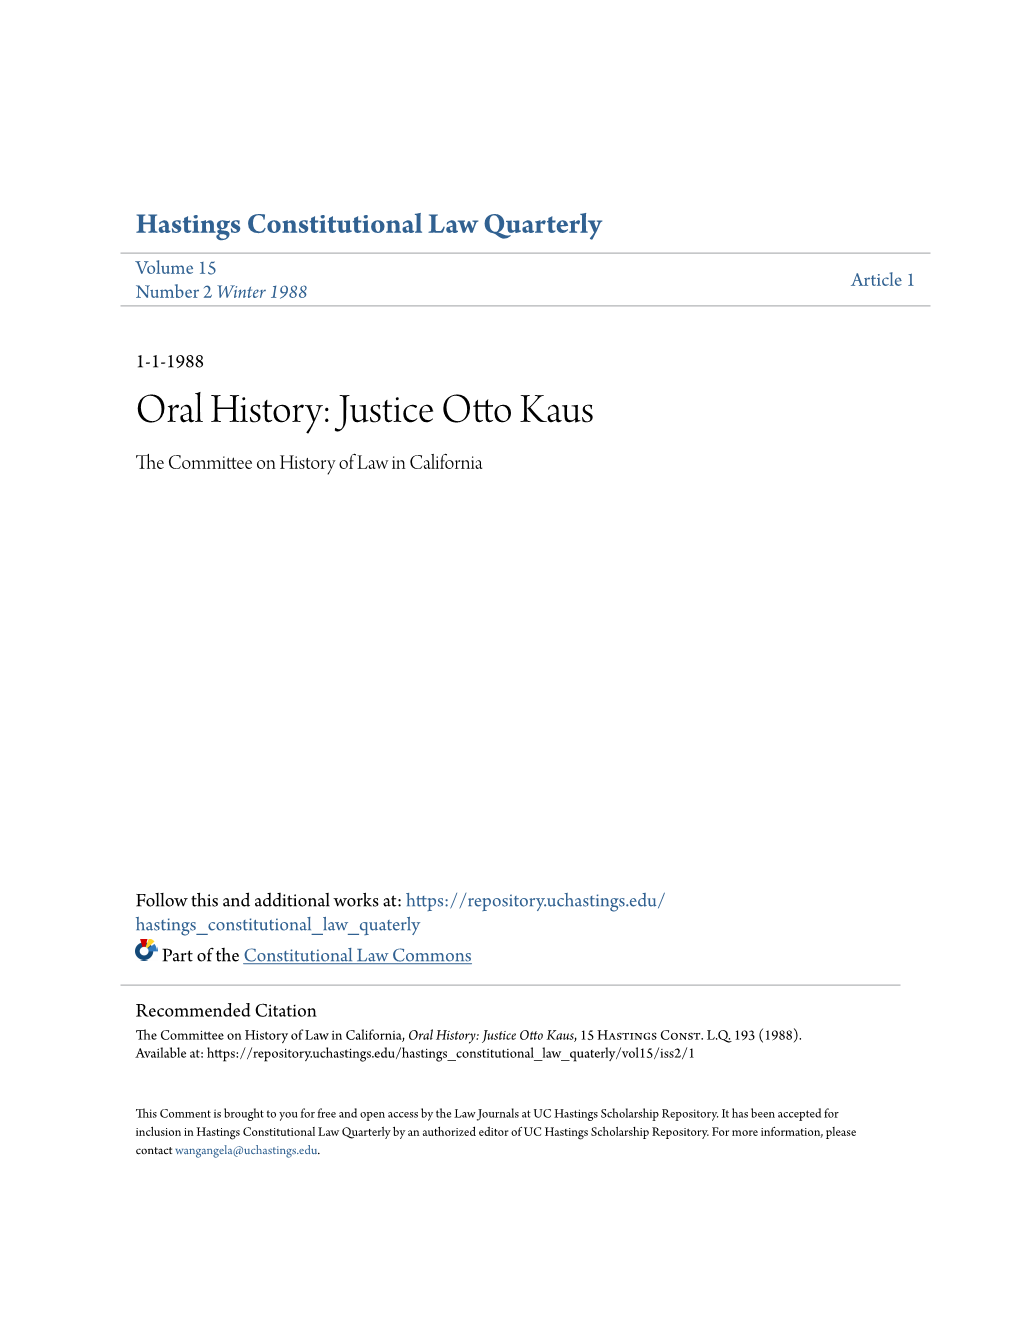 Oral History: Justice Otto Kaus the Ommittc Ee on History of Law in California